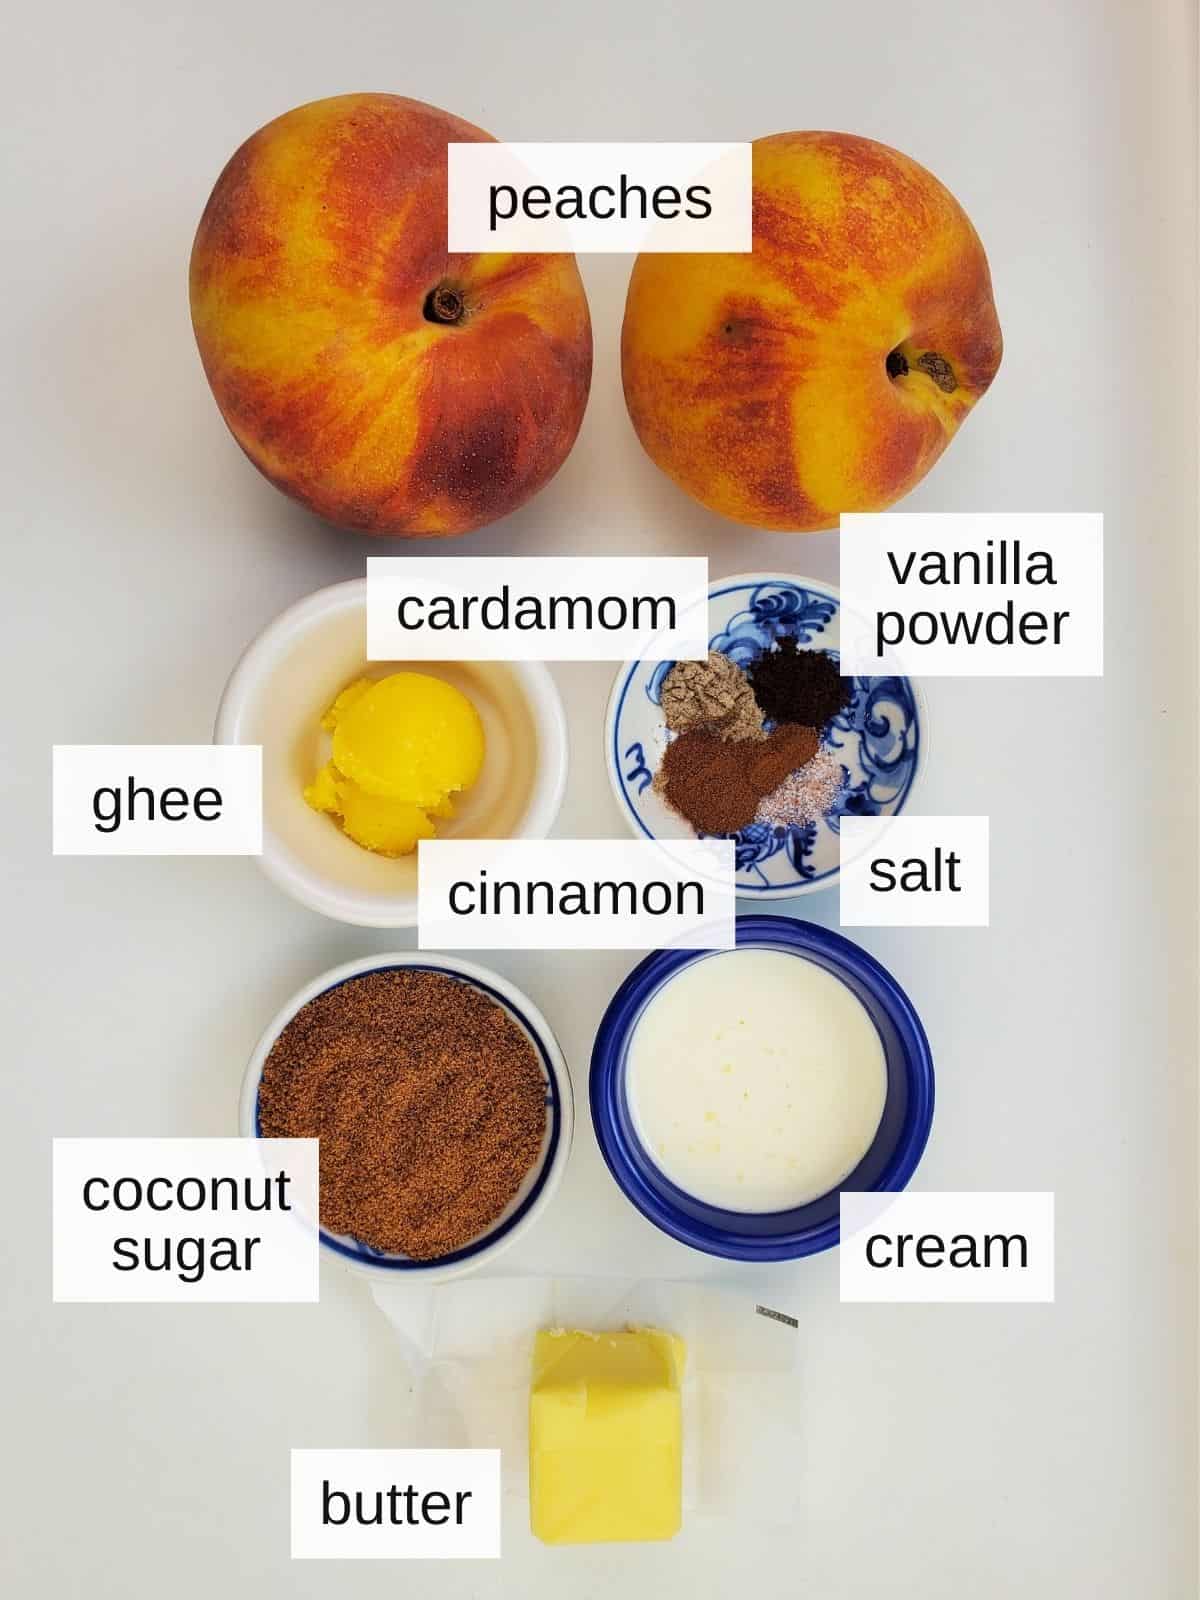 ingredients for caramelized peaches in air fryer, including peaches, cardamom, vanilla powder, ghee, cinnamon, salt, coconut sugar, cream, and butter